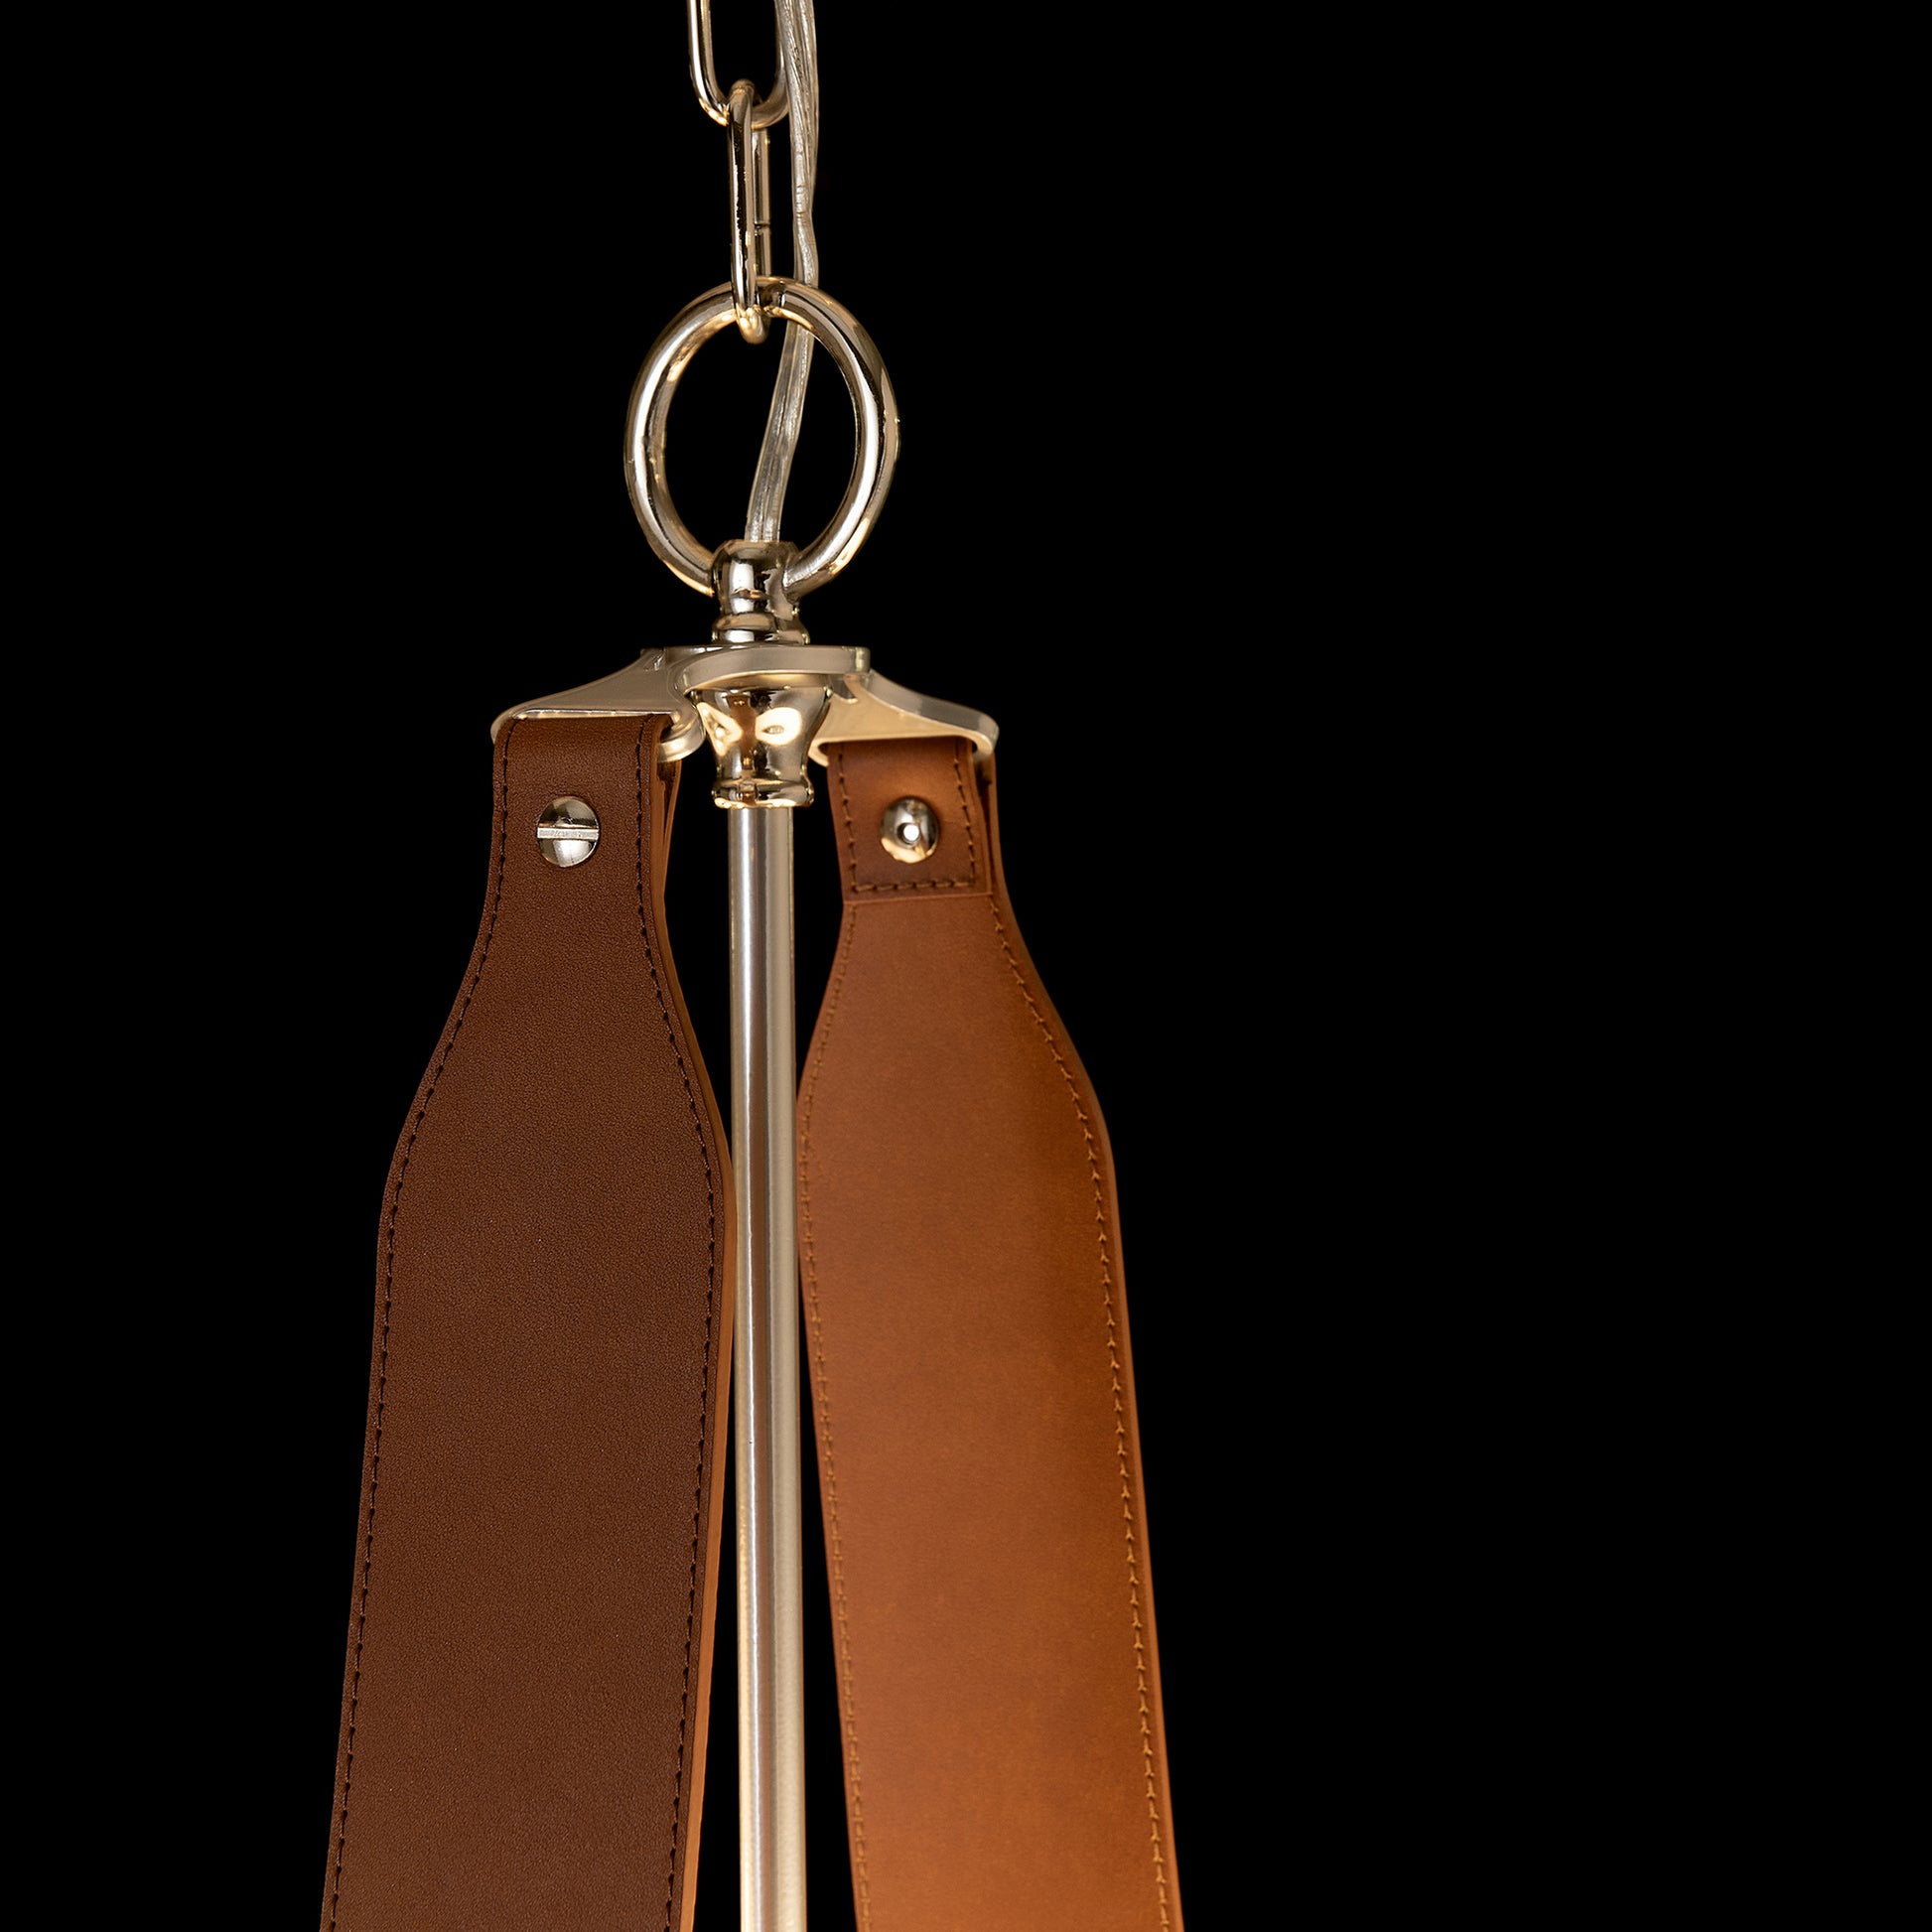 A close-up of a brown leather keychain with two straps, metal rivets, and a silver Saratoga Oval Pendant against a black background by Hubbardton Forge.